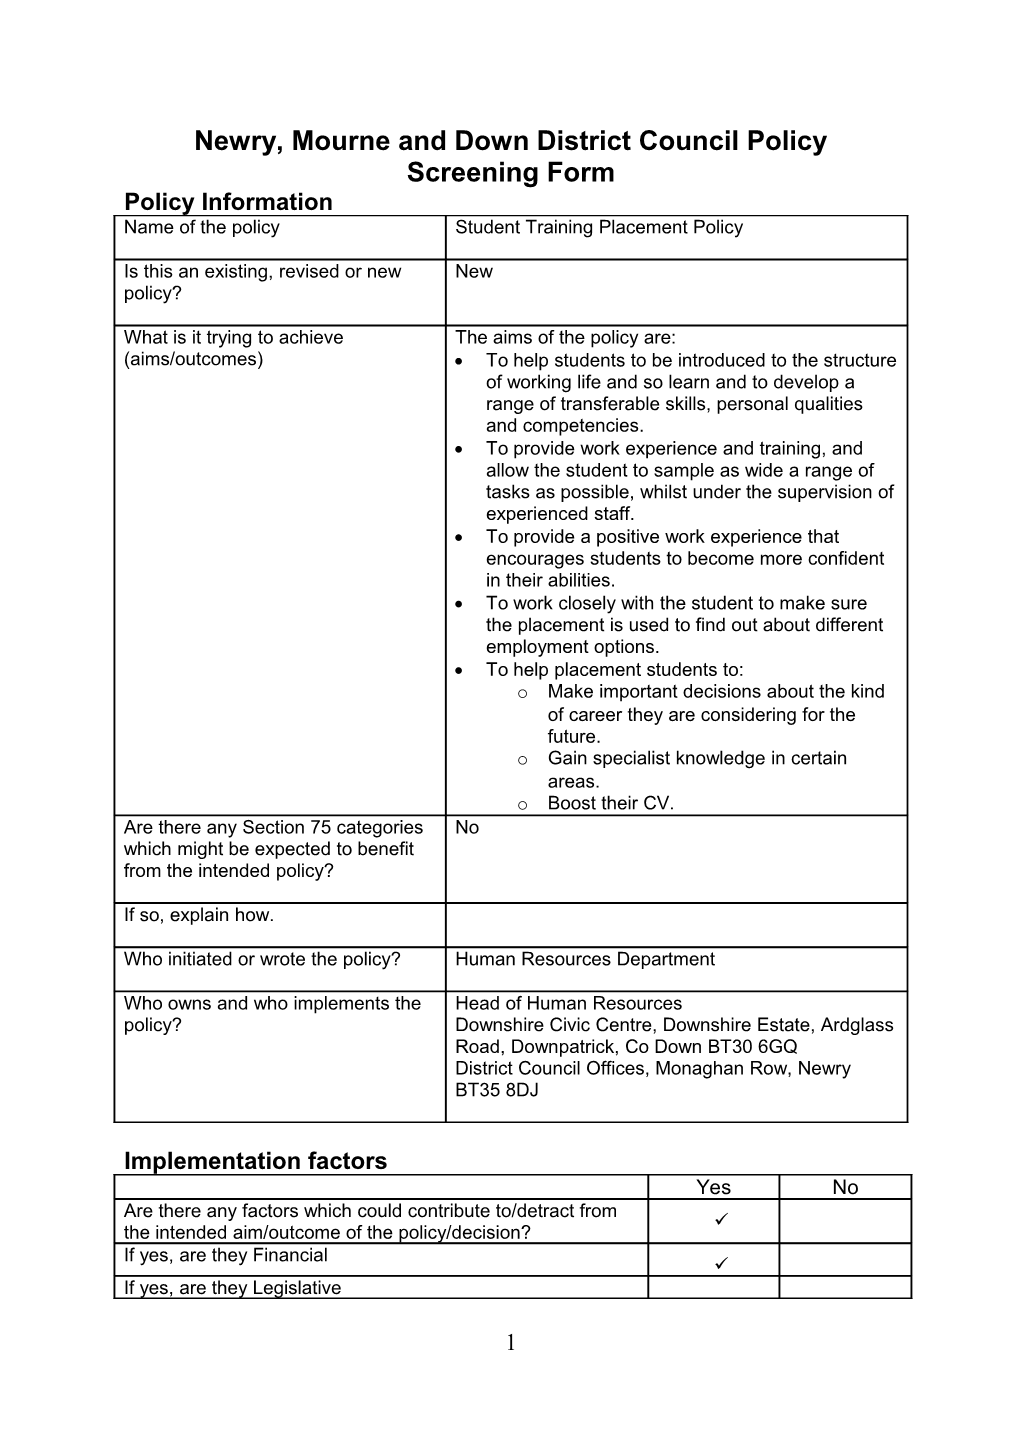 Newry, Mourne and Down District Council Policy Screening Form s2